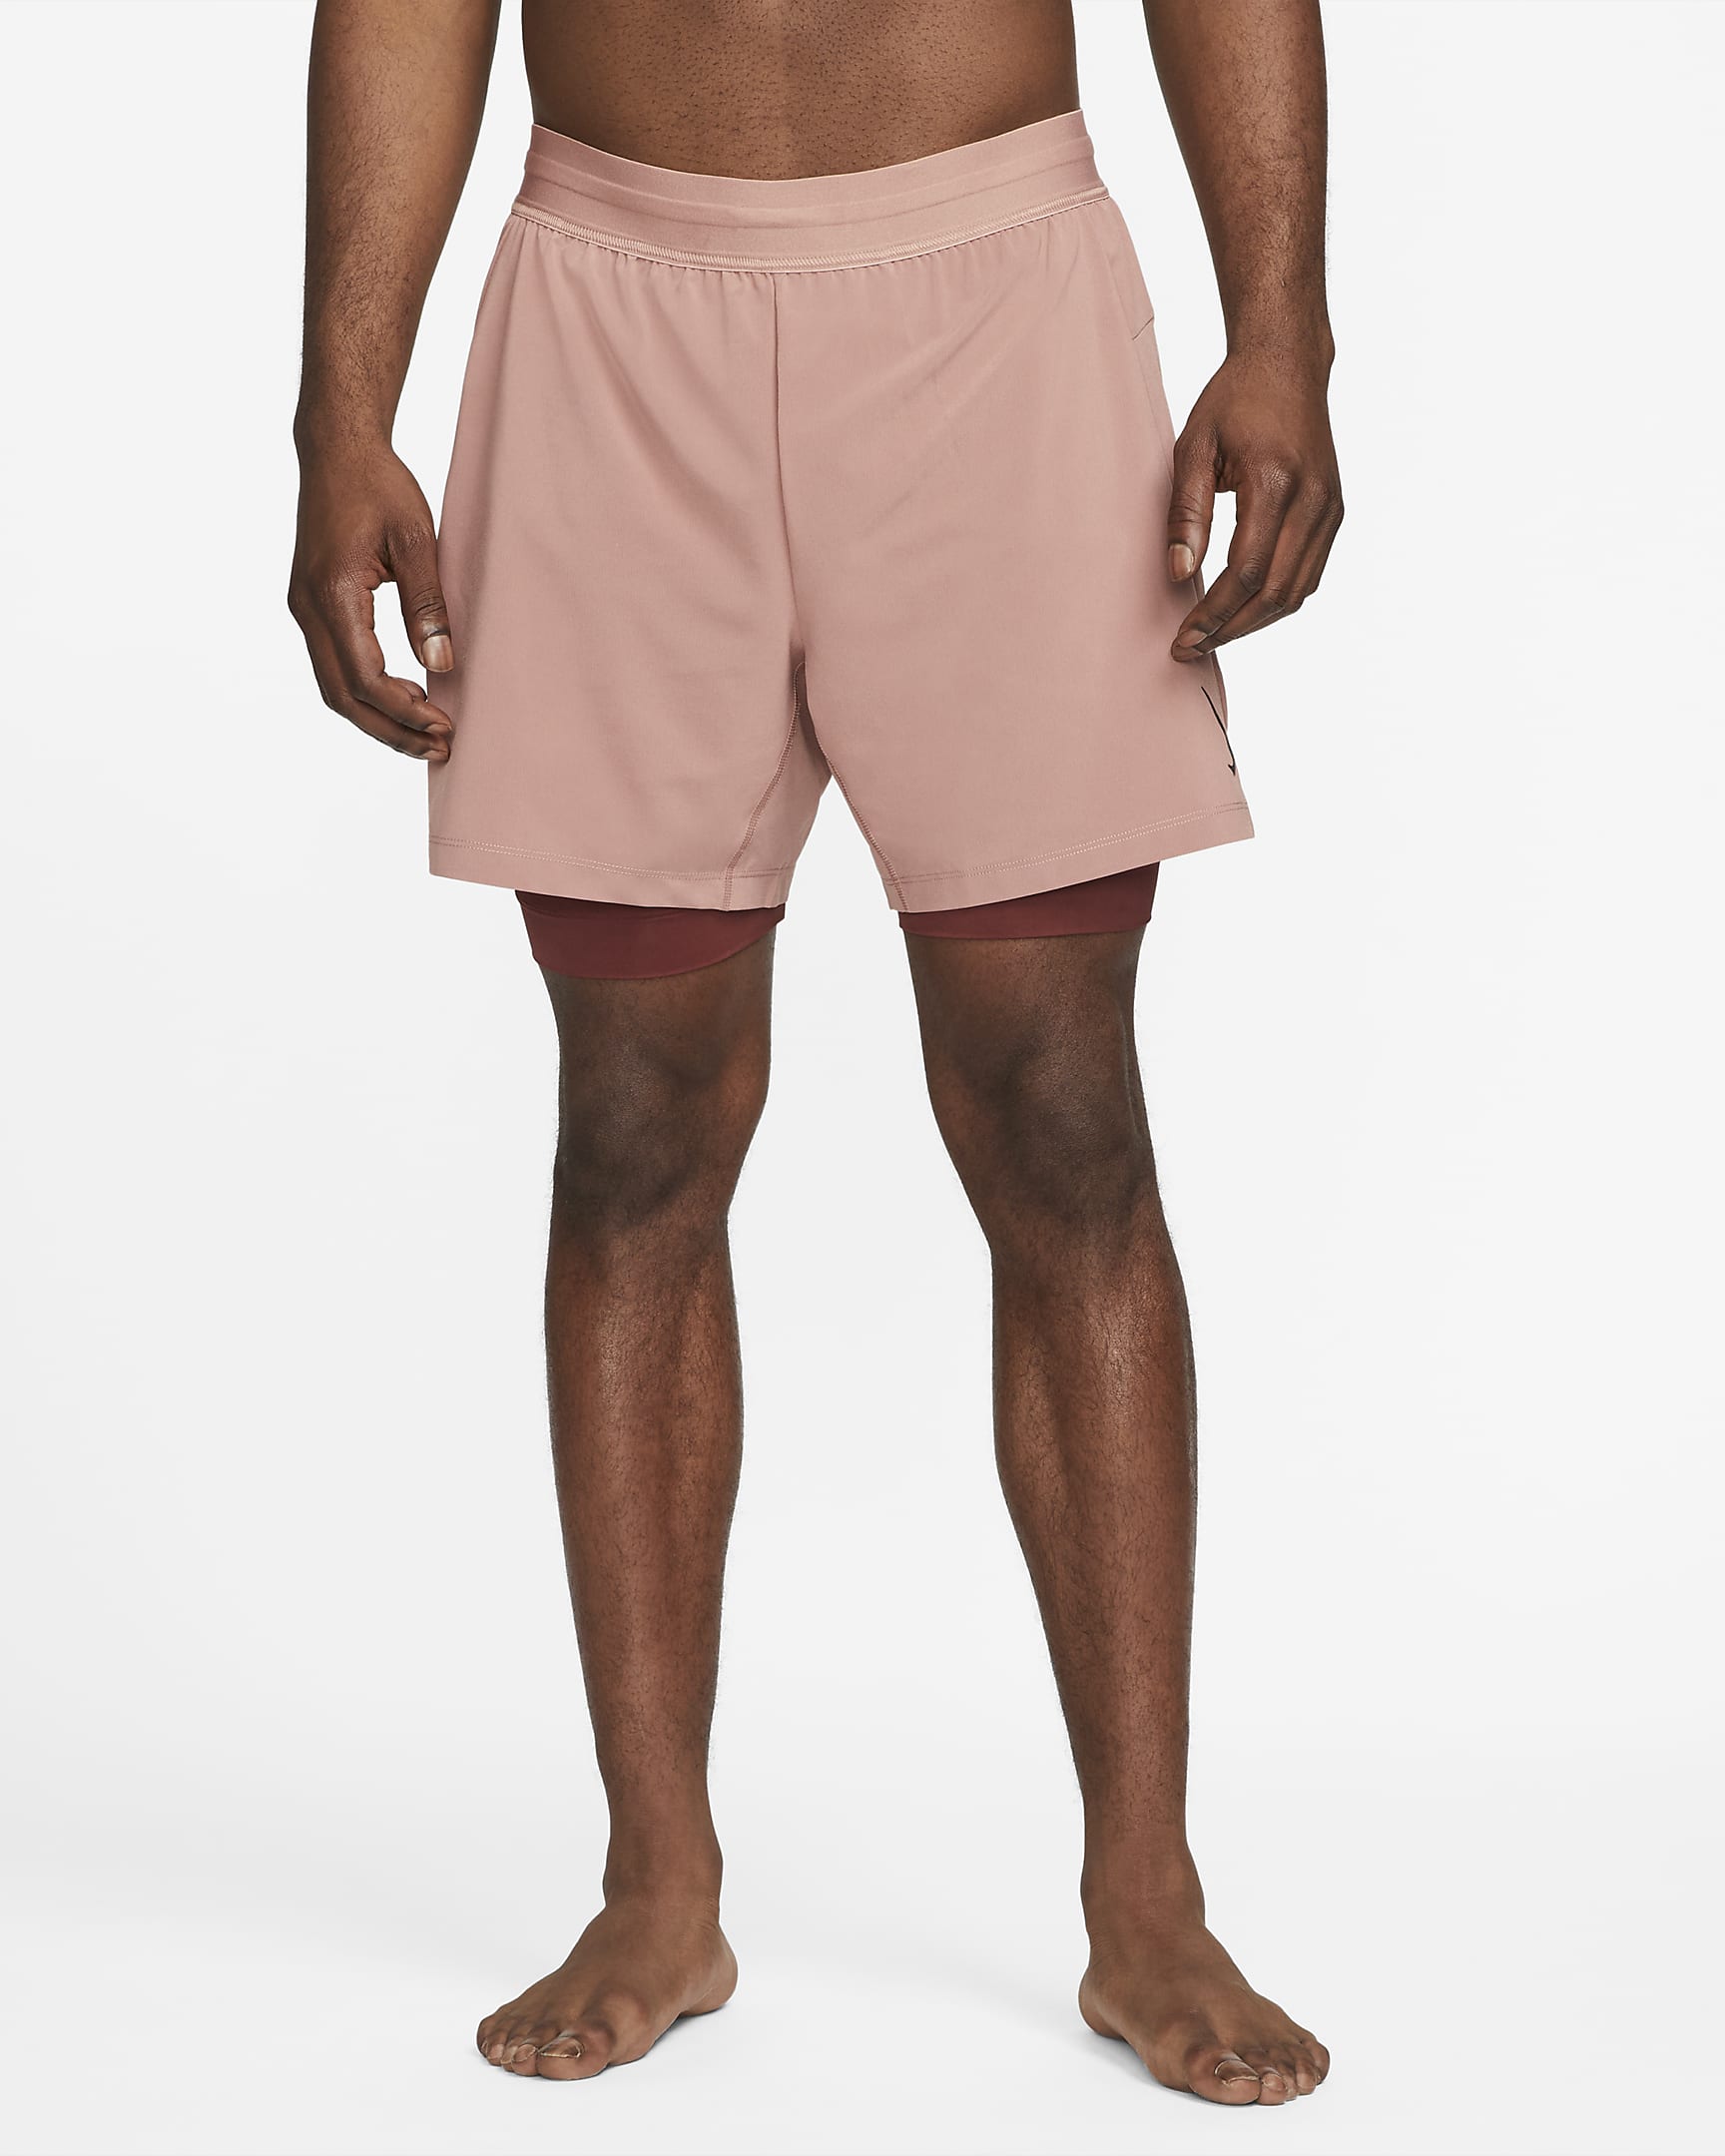 Nike Yoga Men\'s 2-in-1 Shorts Fossil Rose/Oxen Brown